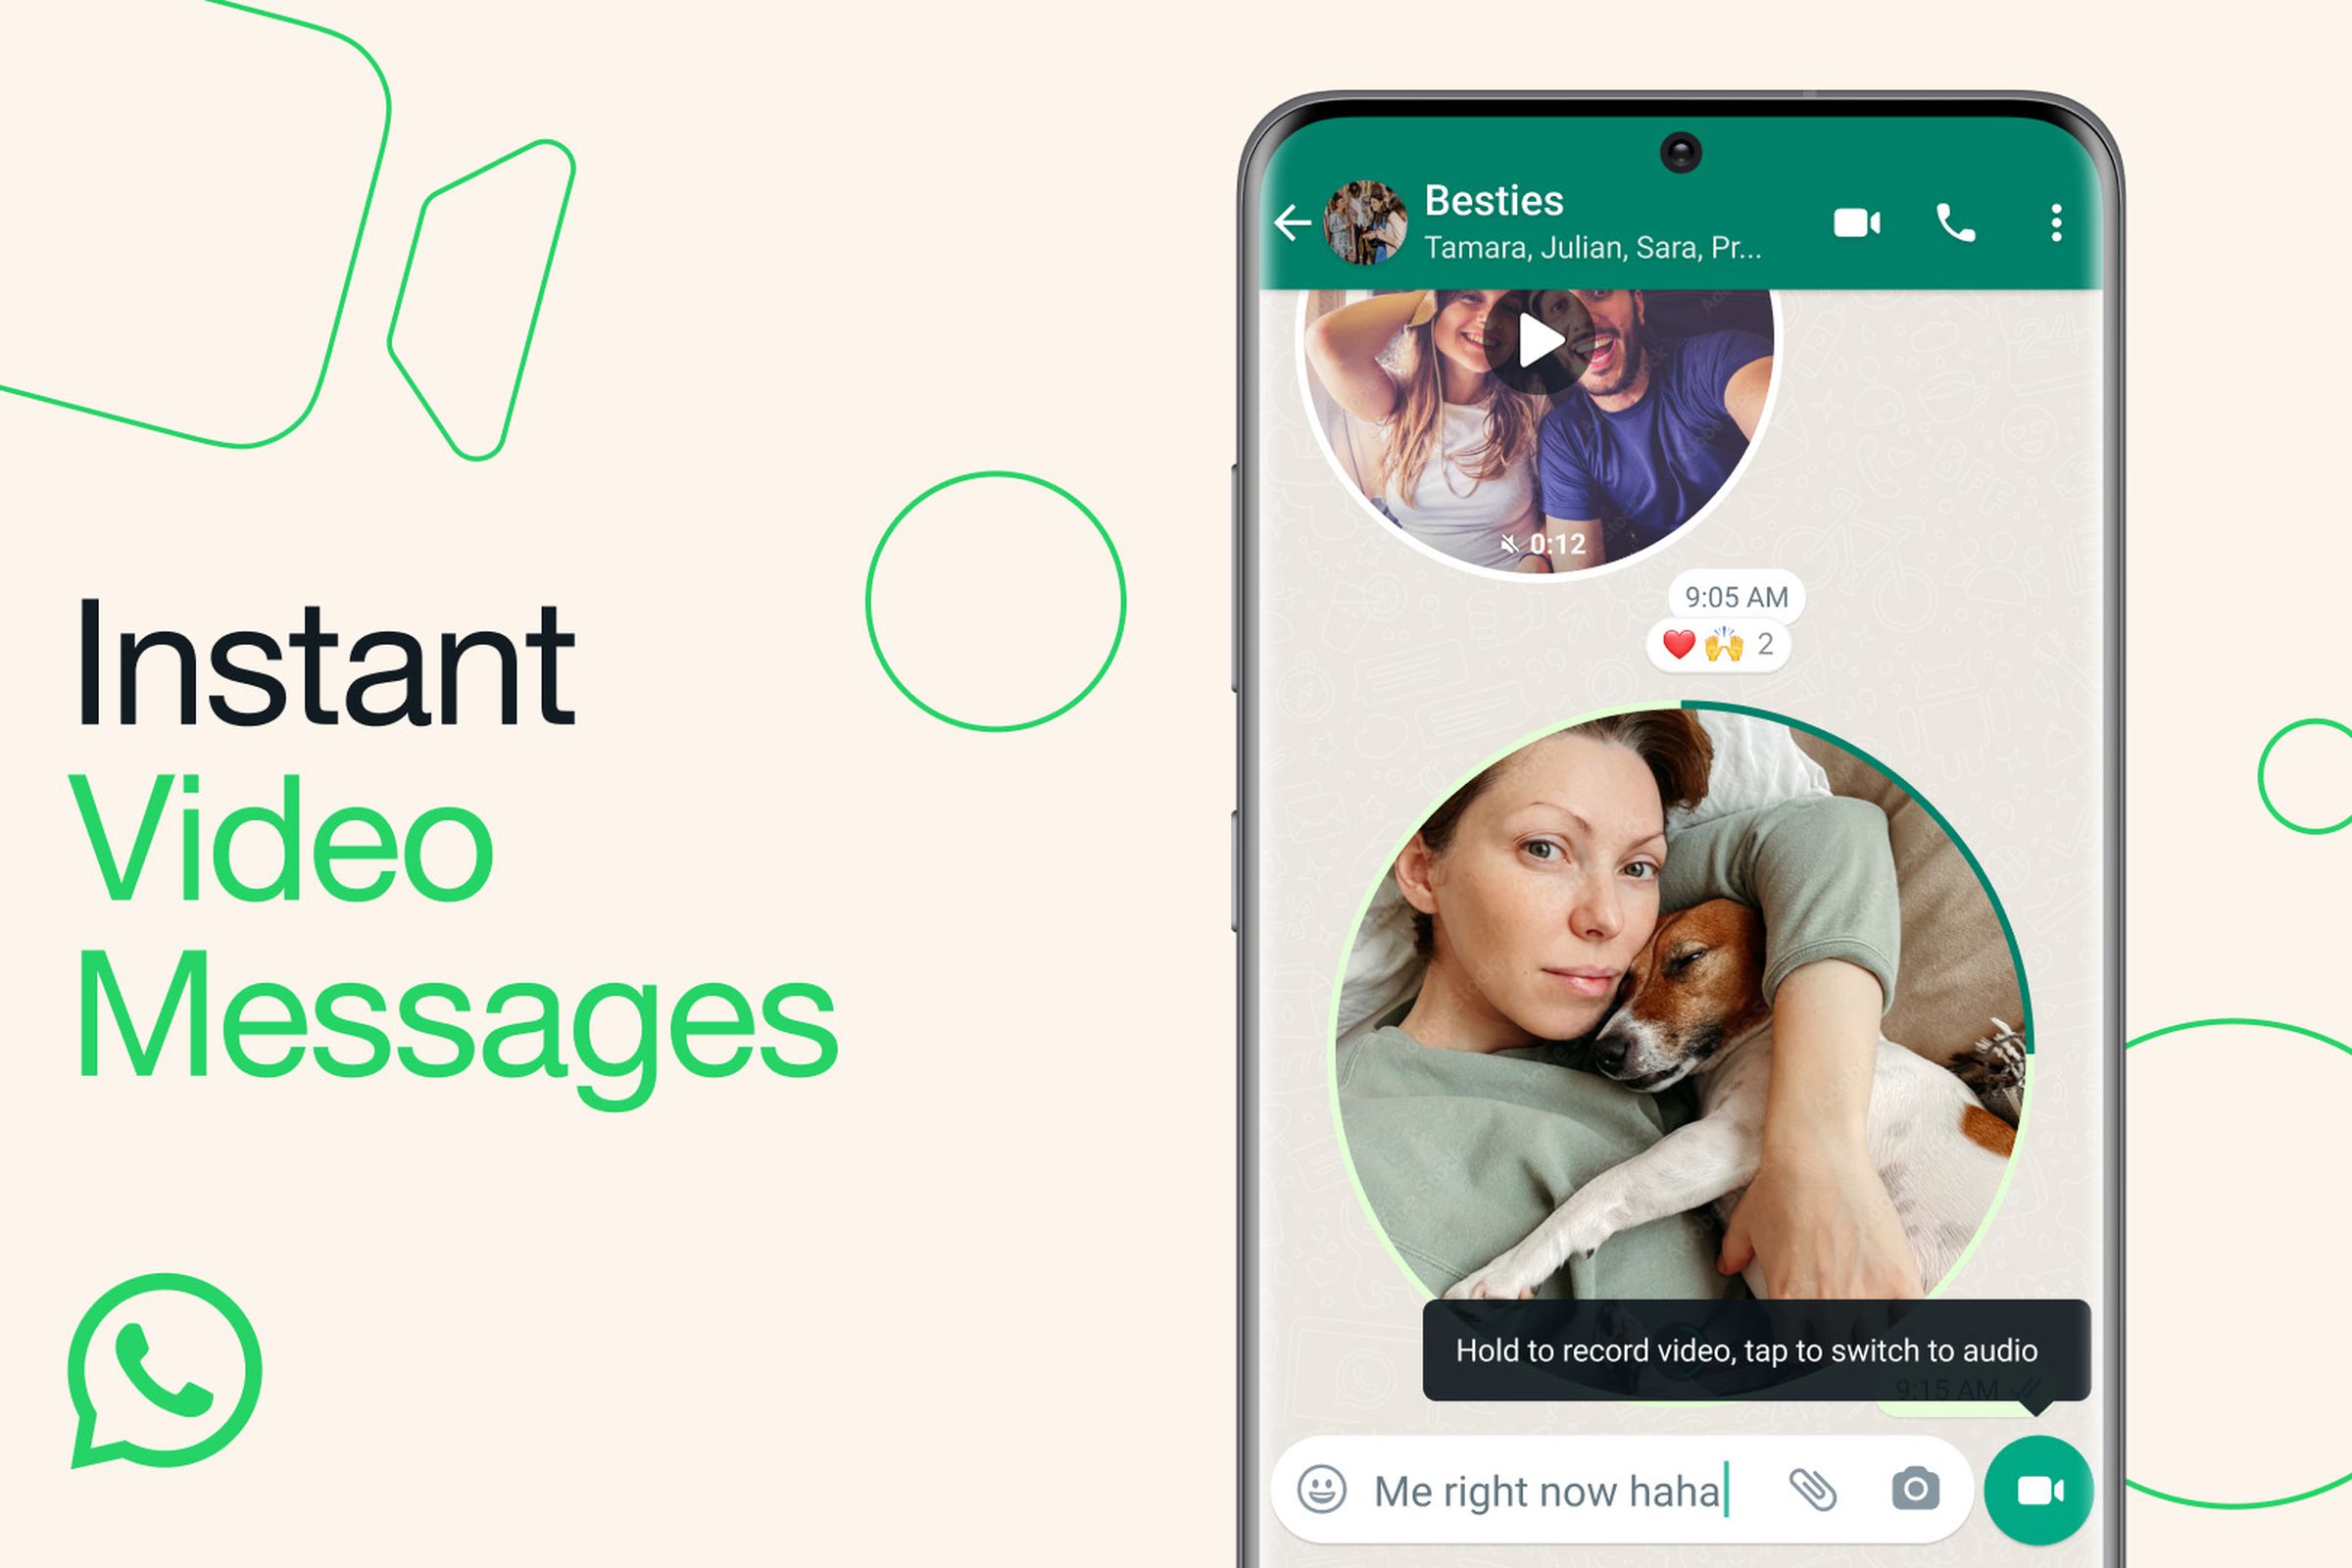 A WhatsApp screenshot showing two video messages.